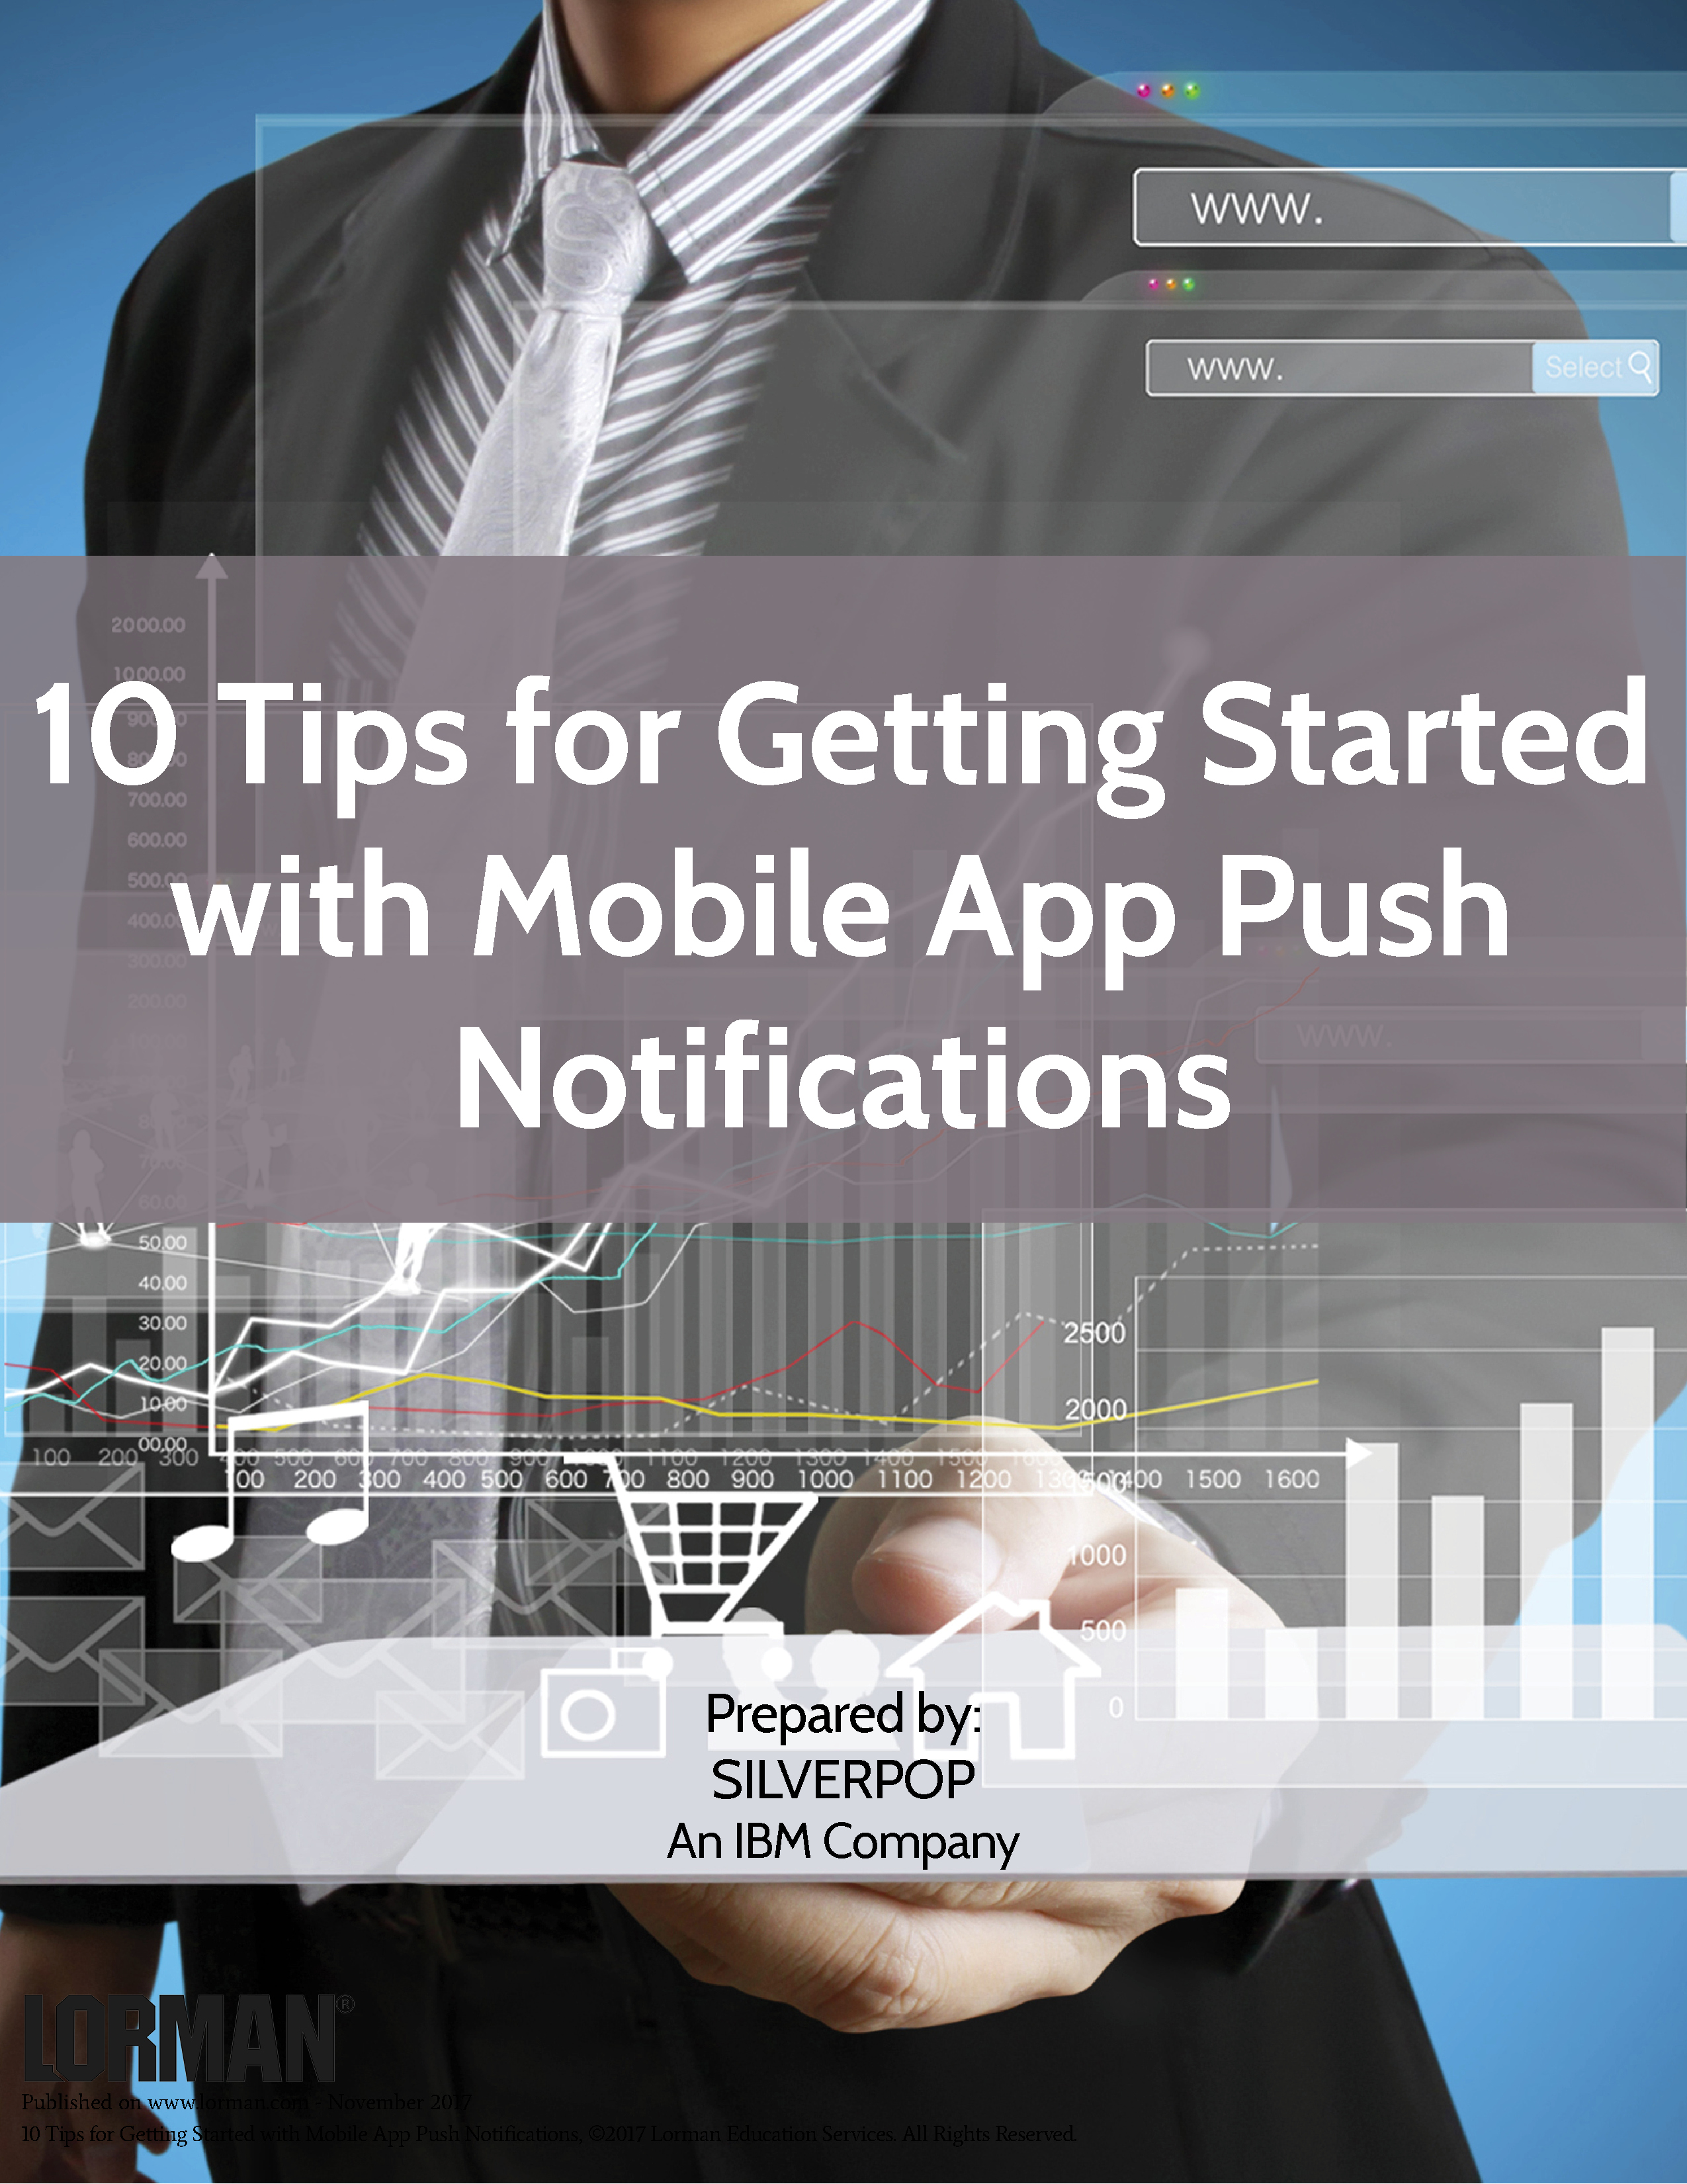 10 Tips for Getting Started with Mobile App Push Notifications